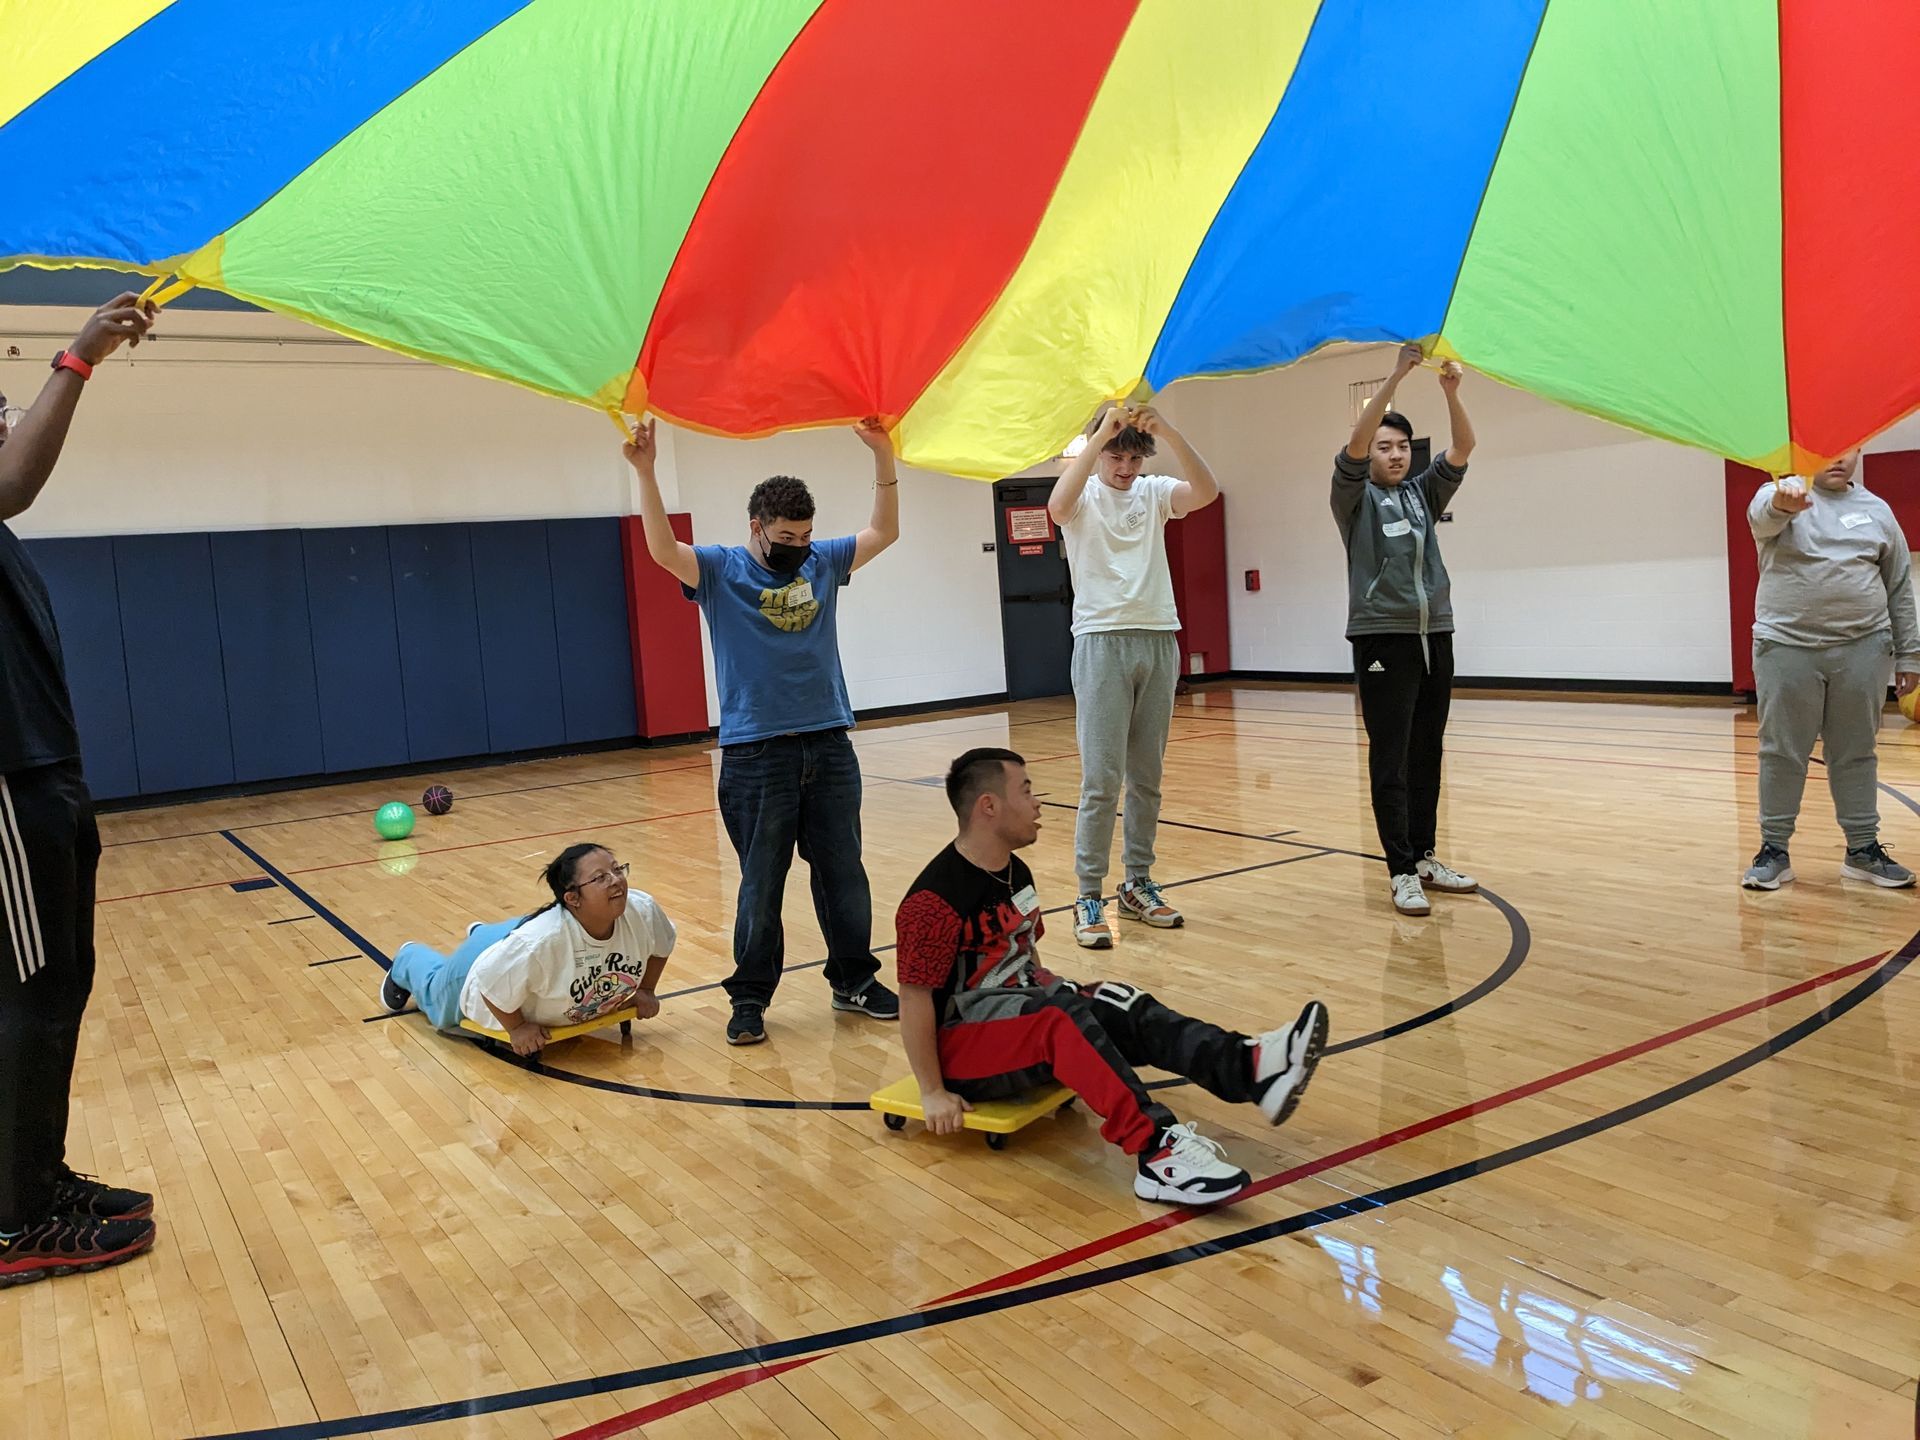 A group of youth plays with a parachute. Two youth with down syndrome go under the parachute on scooters